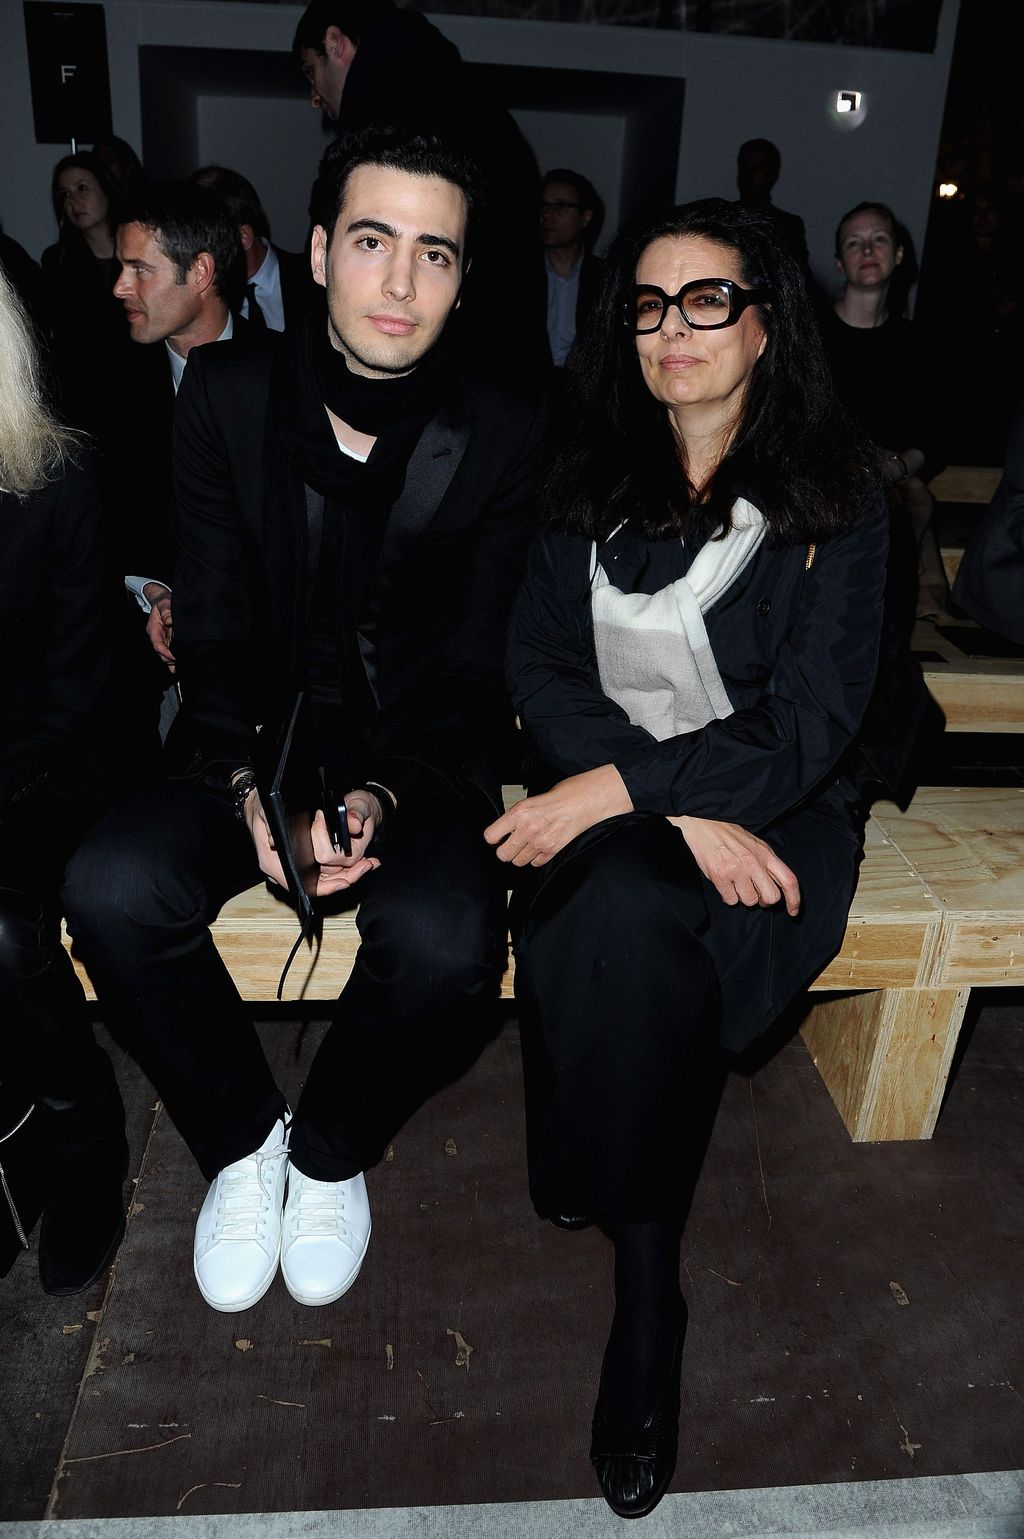 PARIS, FRANCE - MARCH 04:  Jean-Victor Bettencourt-Meyers and Francoise Bettencourt-Meyers attend the Saint Laurent Fall/Winter 2013 Ready-to-Wear show as part of Paris Fashion Week on March 4, 2013 in Paris, France.  (Photo by Pascal Le Segretain/Getty Images)